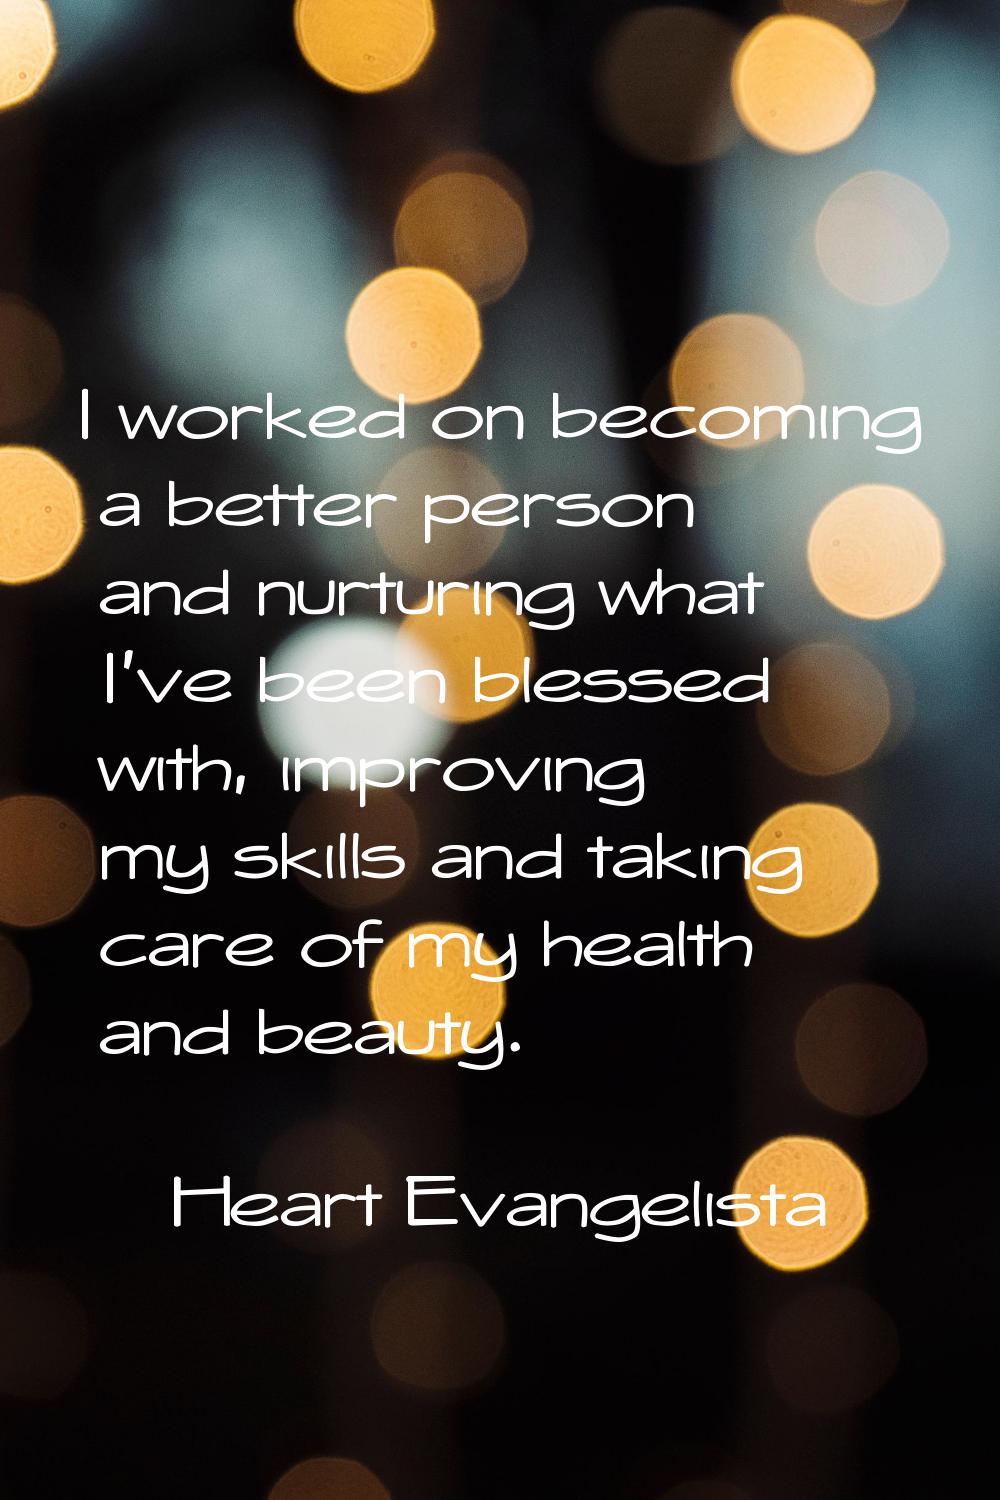 I worked on becoming a better person and nurturing what I've been blessed with, improving my skills